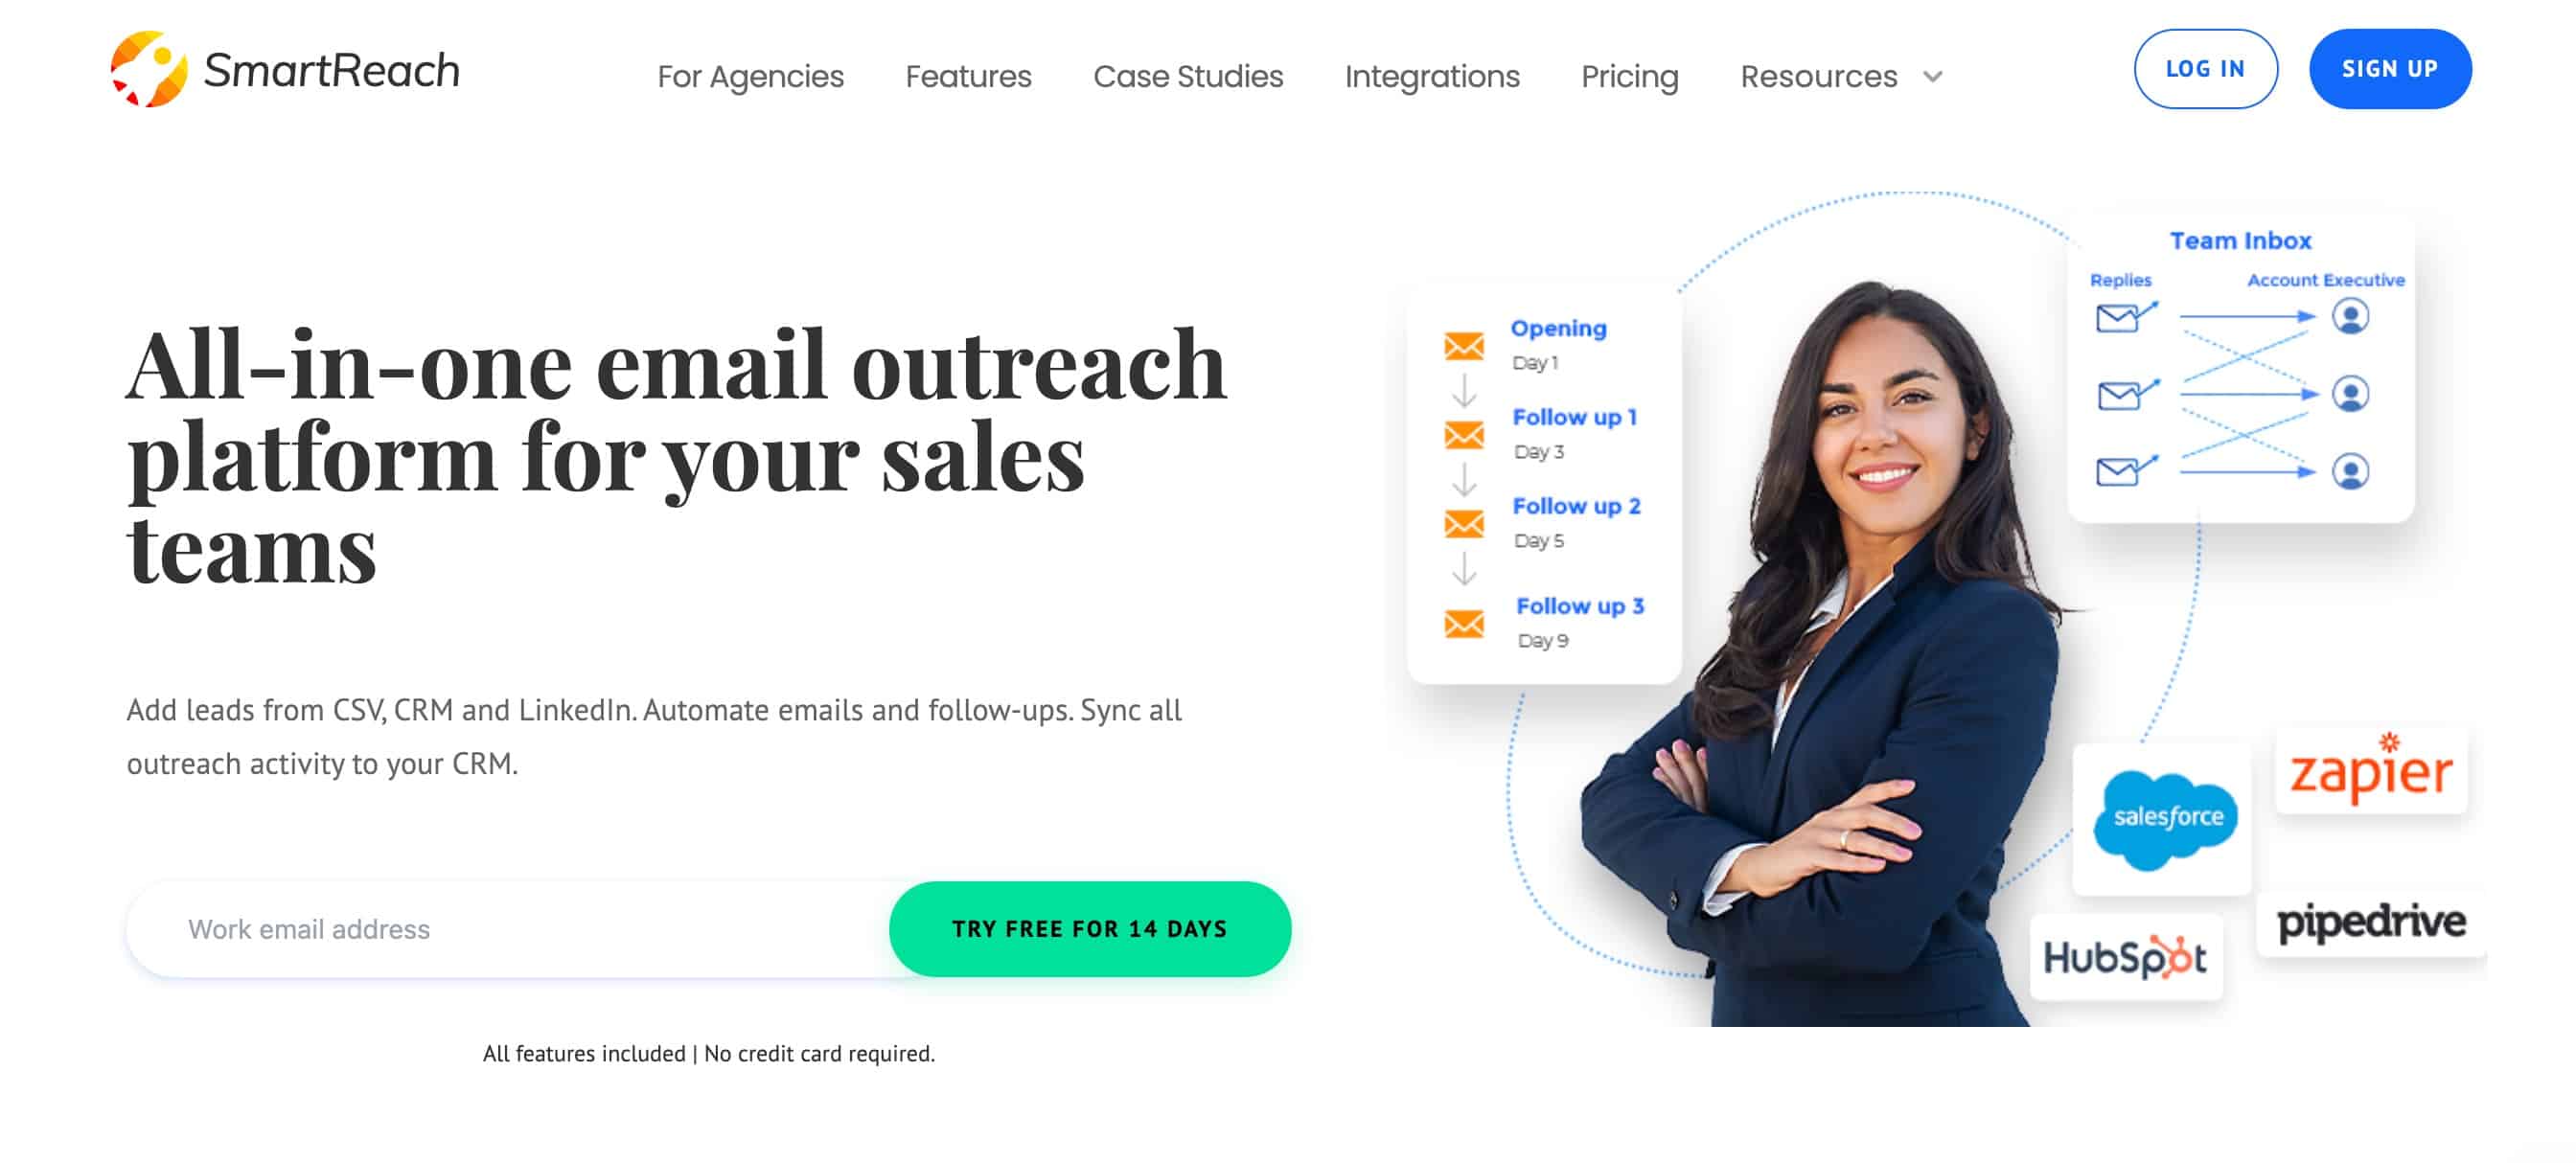 SmartReach Cold Email Software - Best Cold Email Outreach Software Tools for Cold Email Outreach Solutions